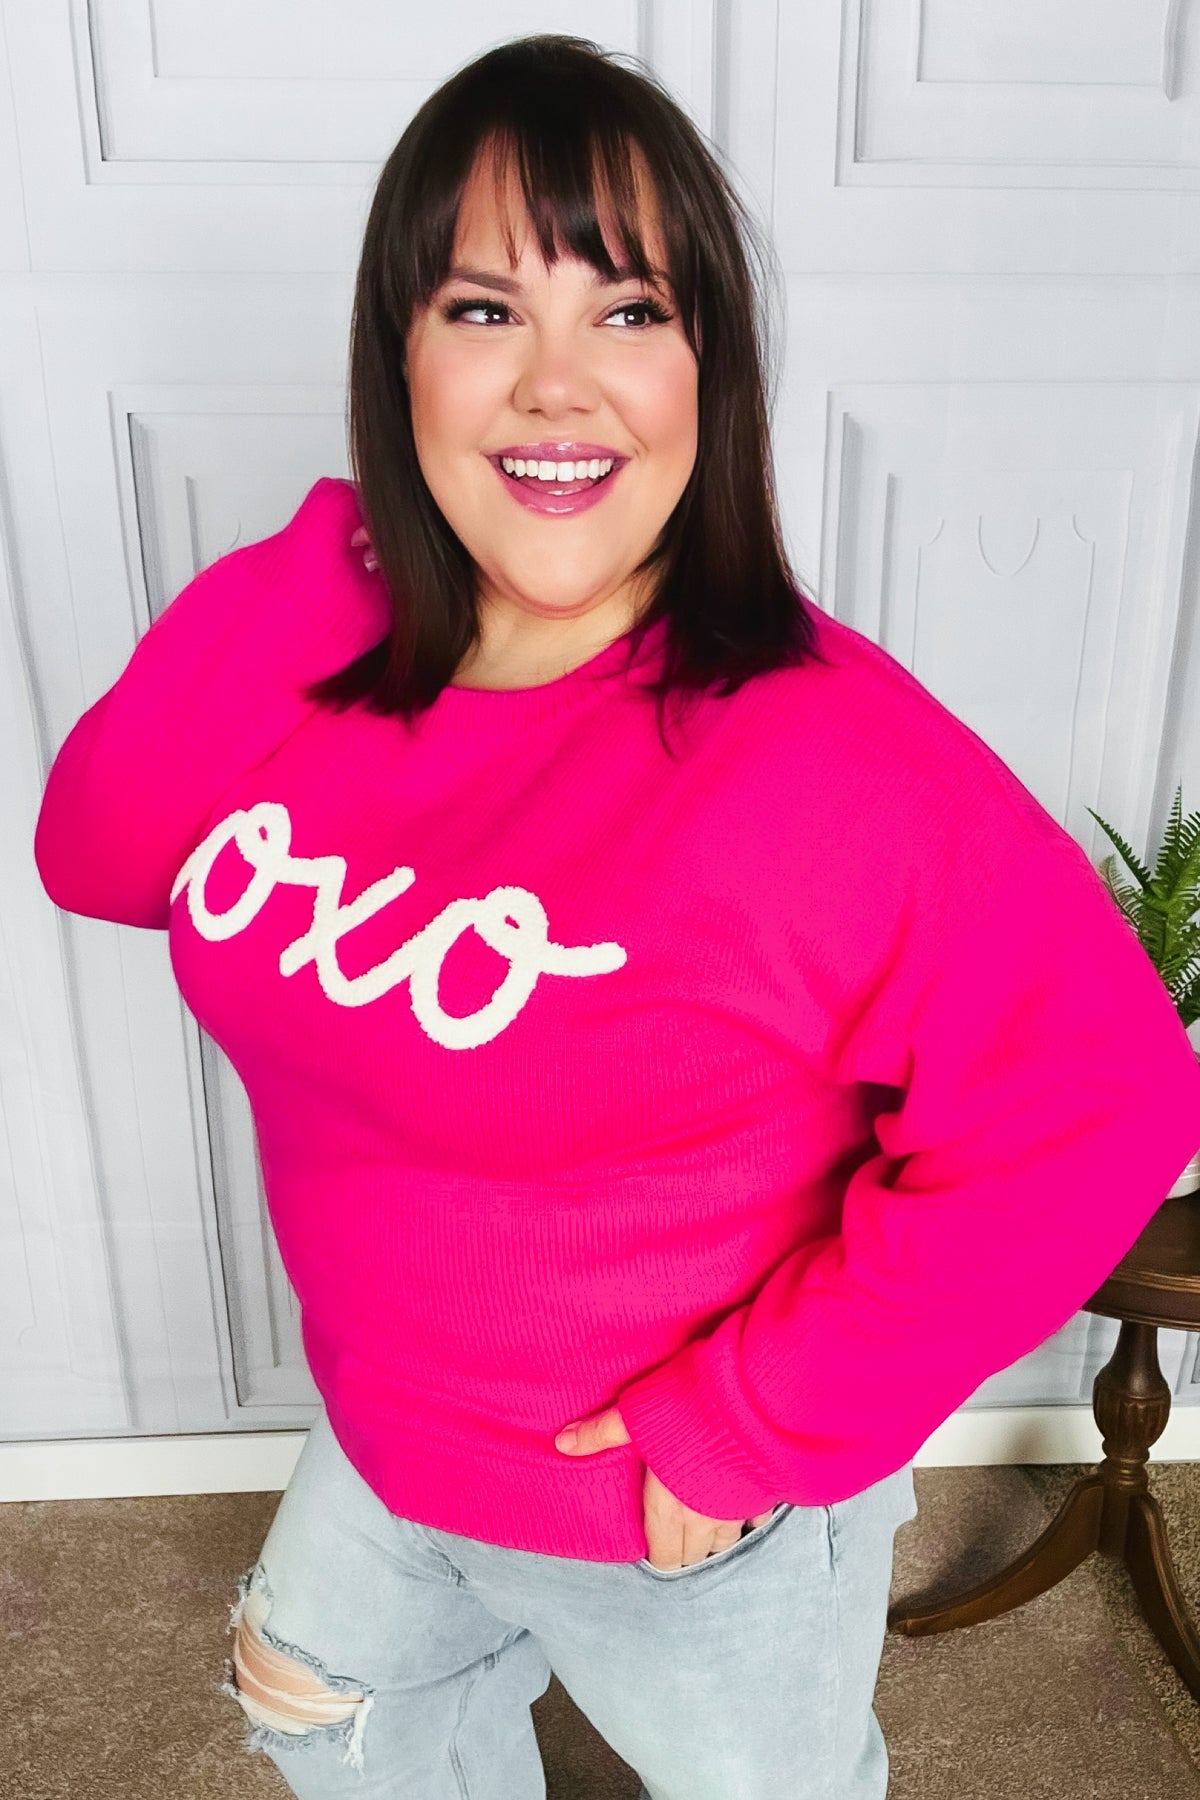 Love In the Air "Xoxo" Embroidered Sweater